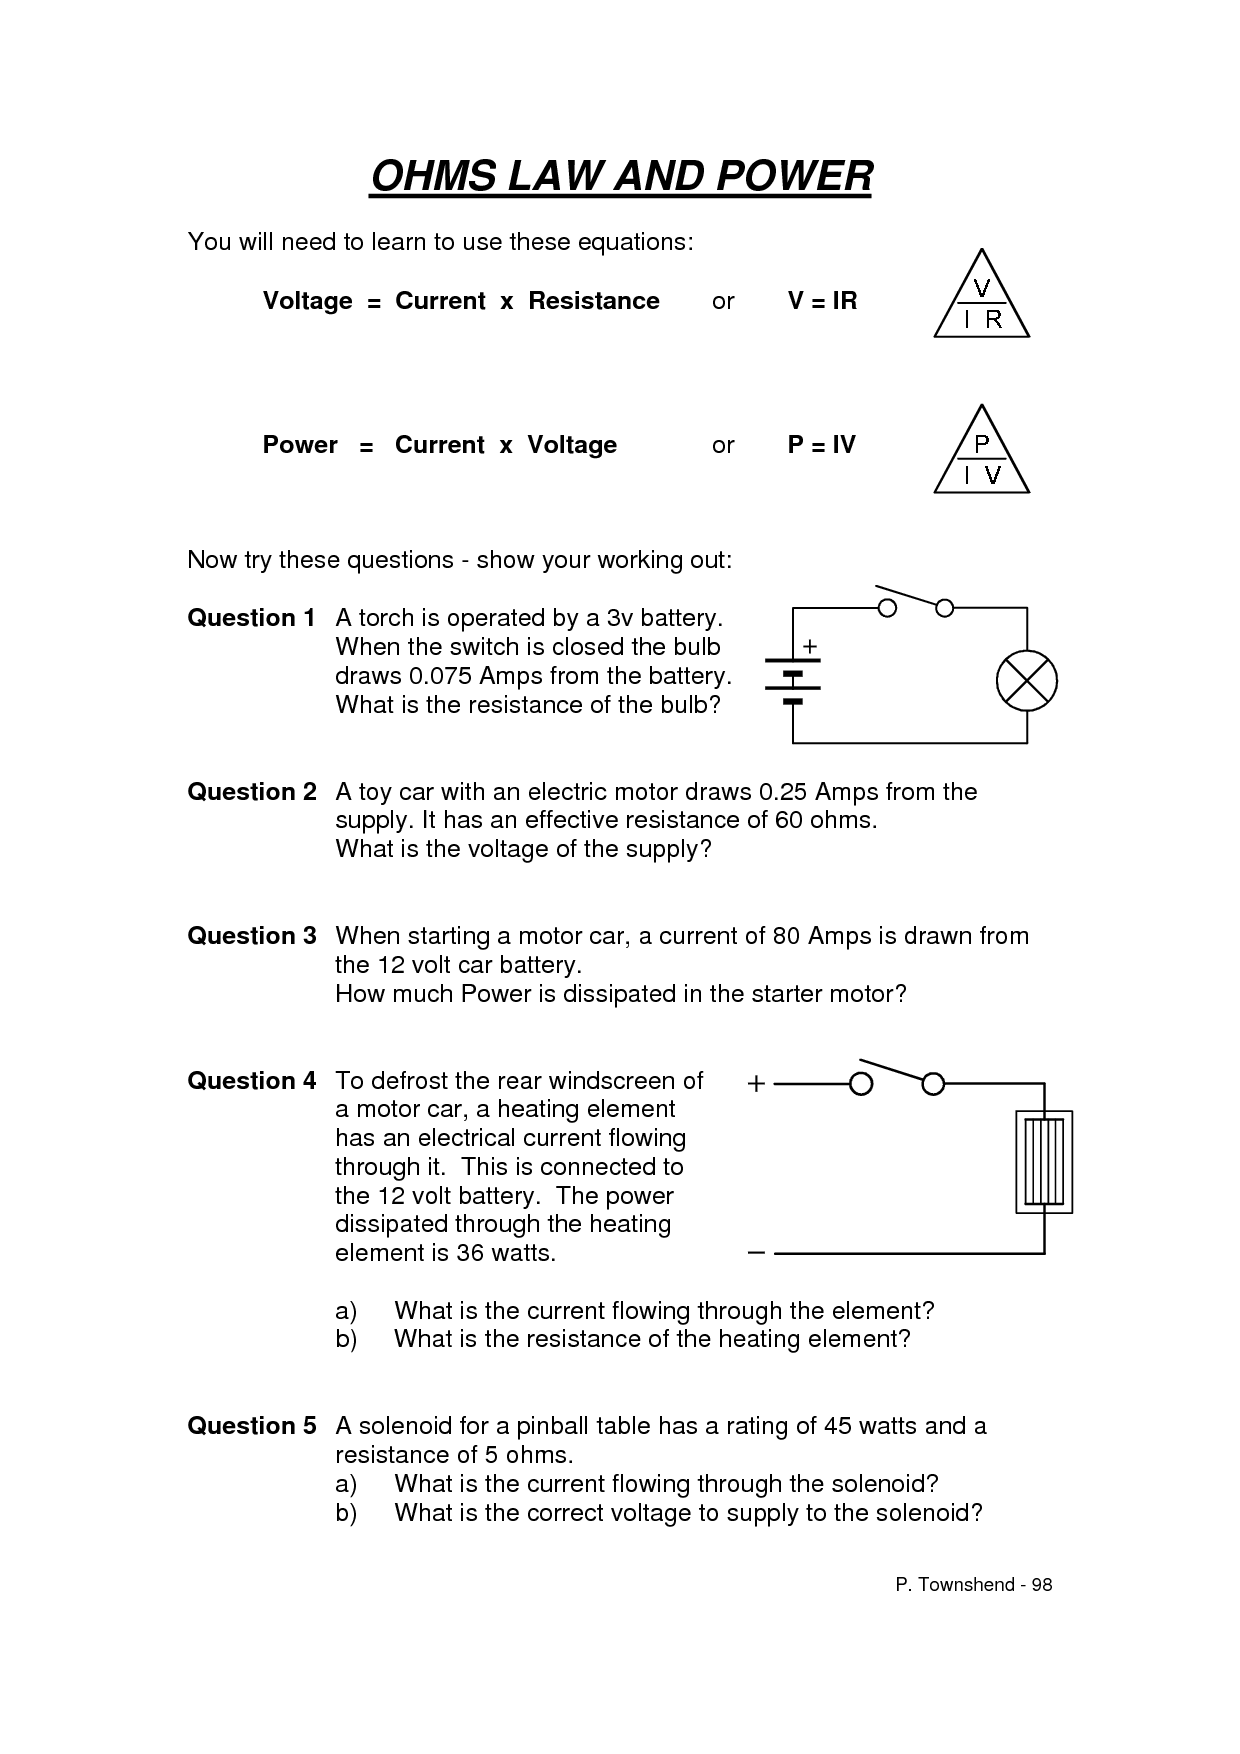 13-best-images-of-ohms-law-calculations-worksheet-ohms-law-worksheet-answers-ohms-law-series